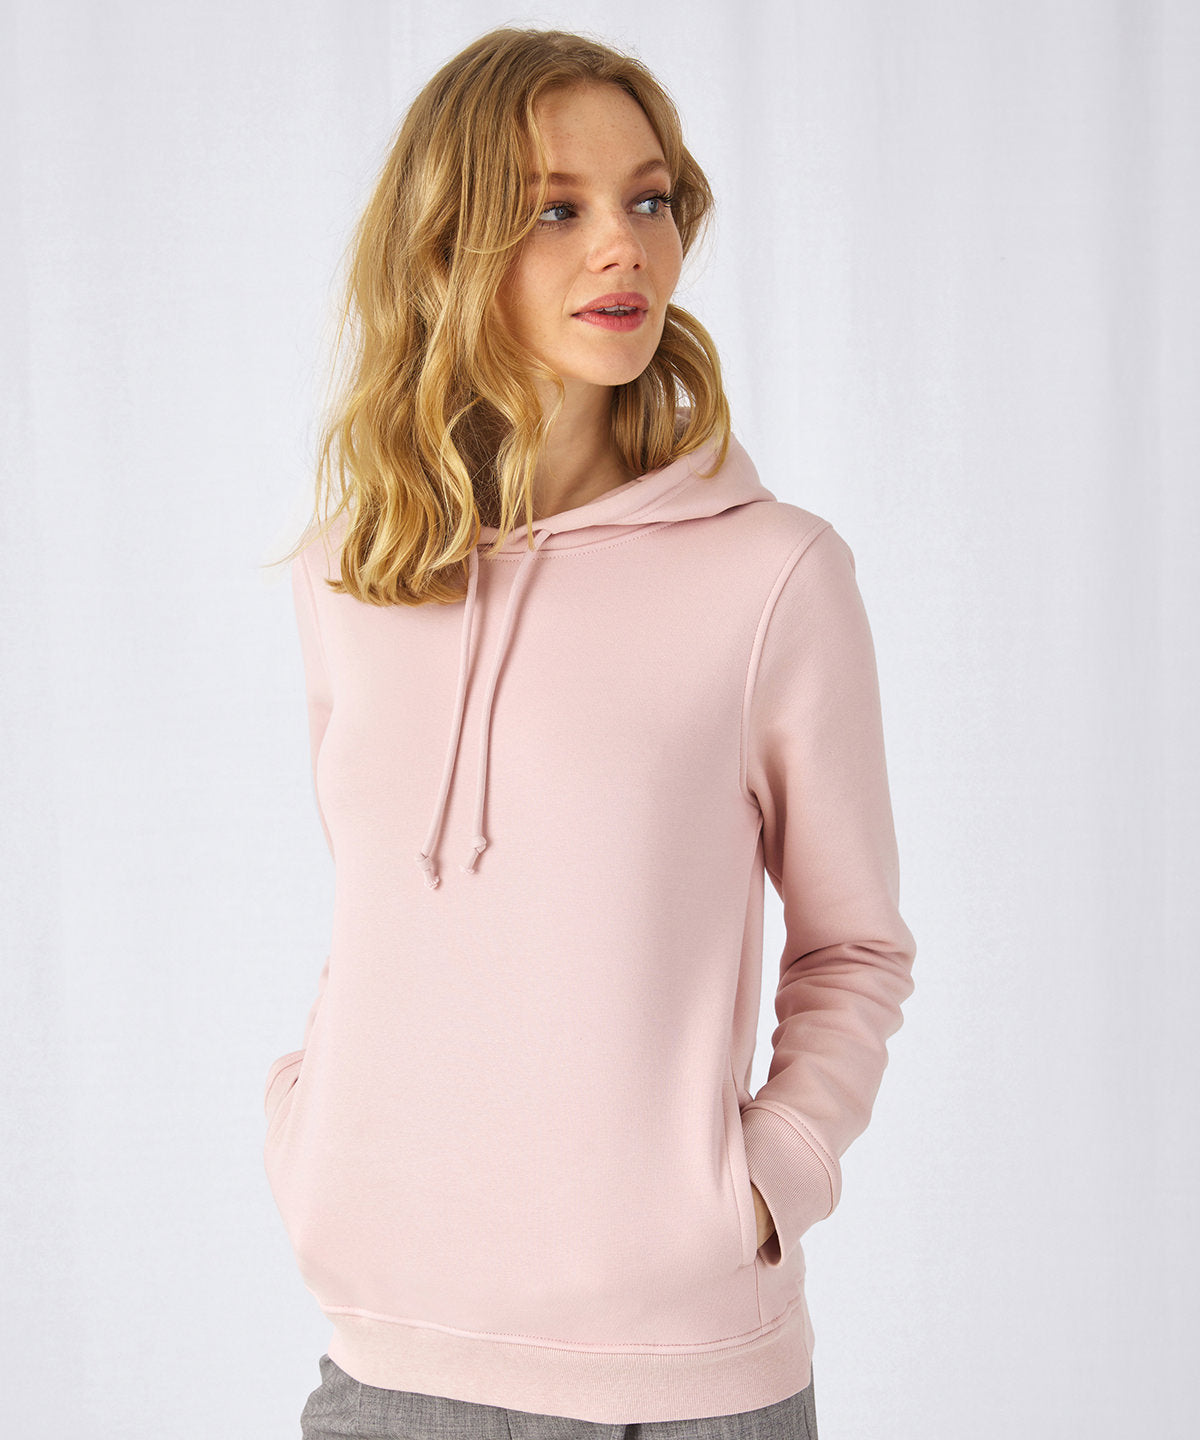 B&C Collection Inspire Hooded Women